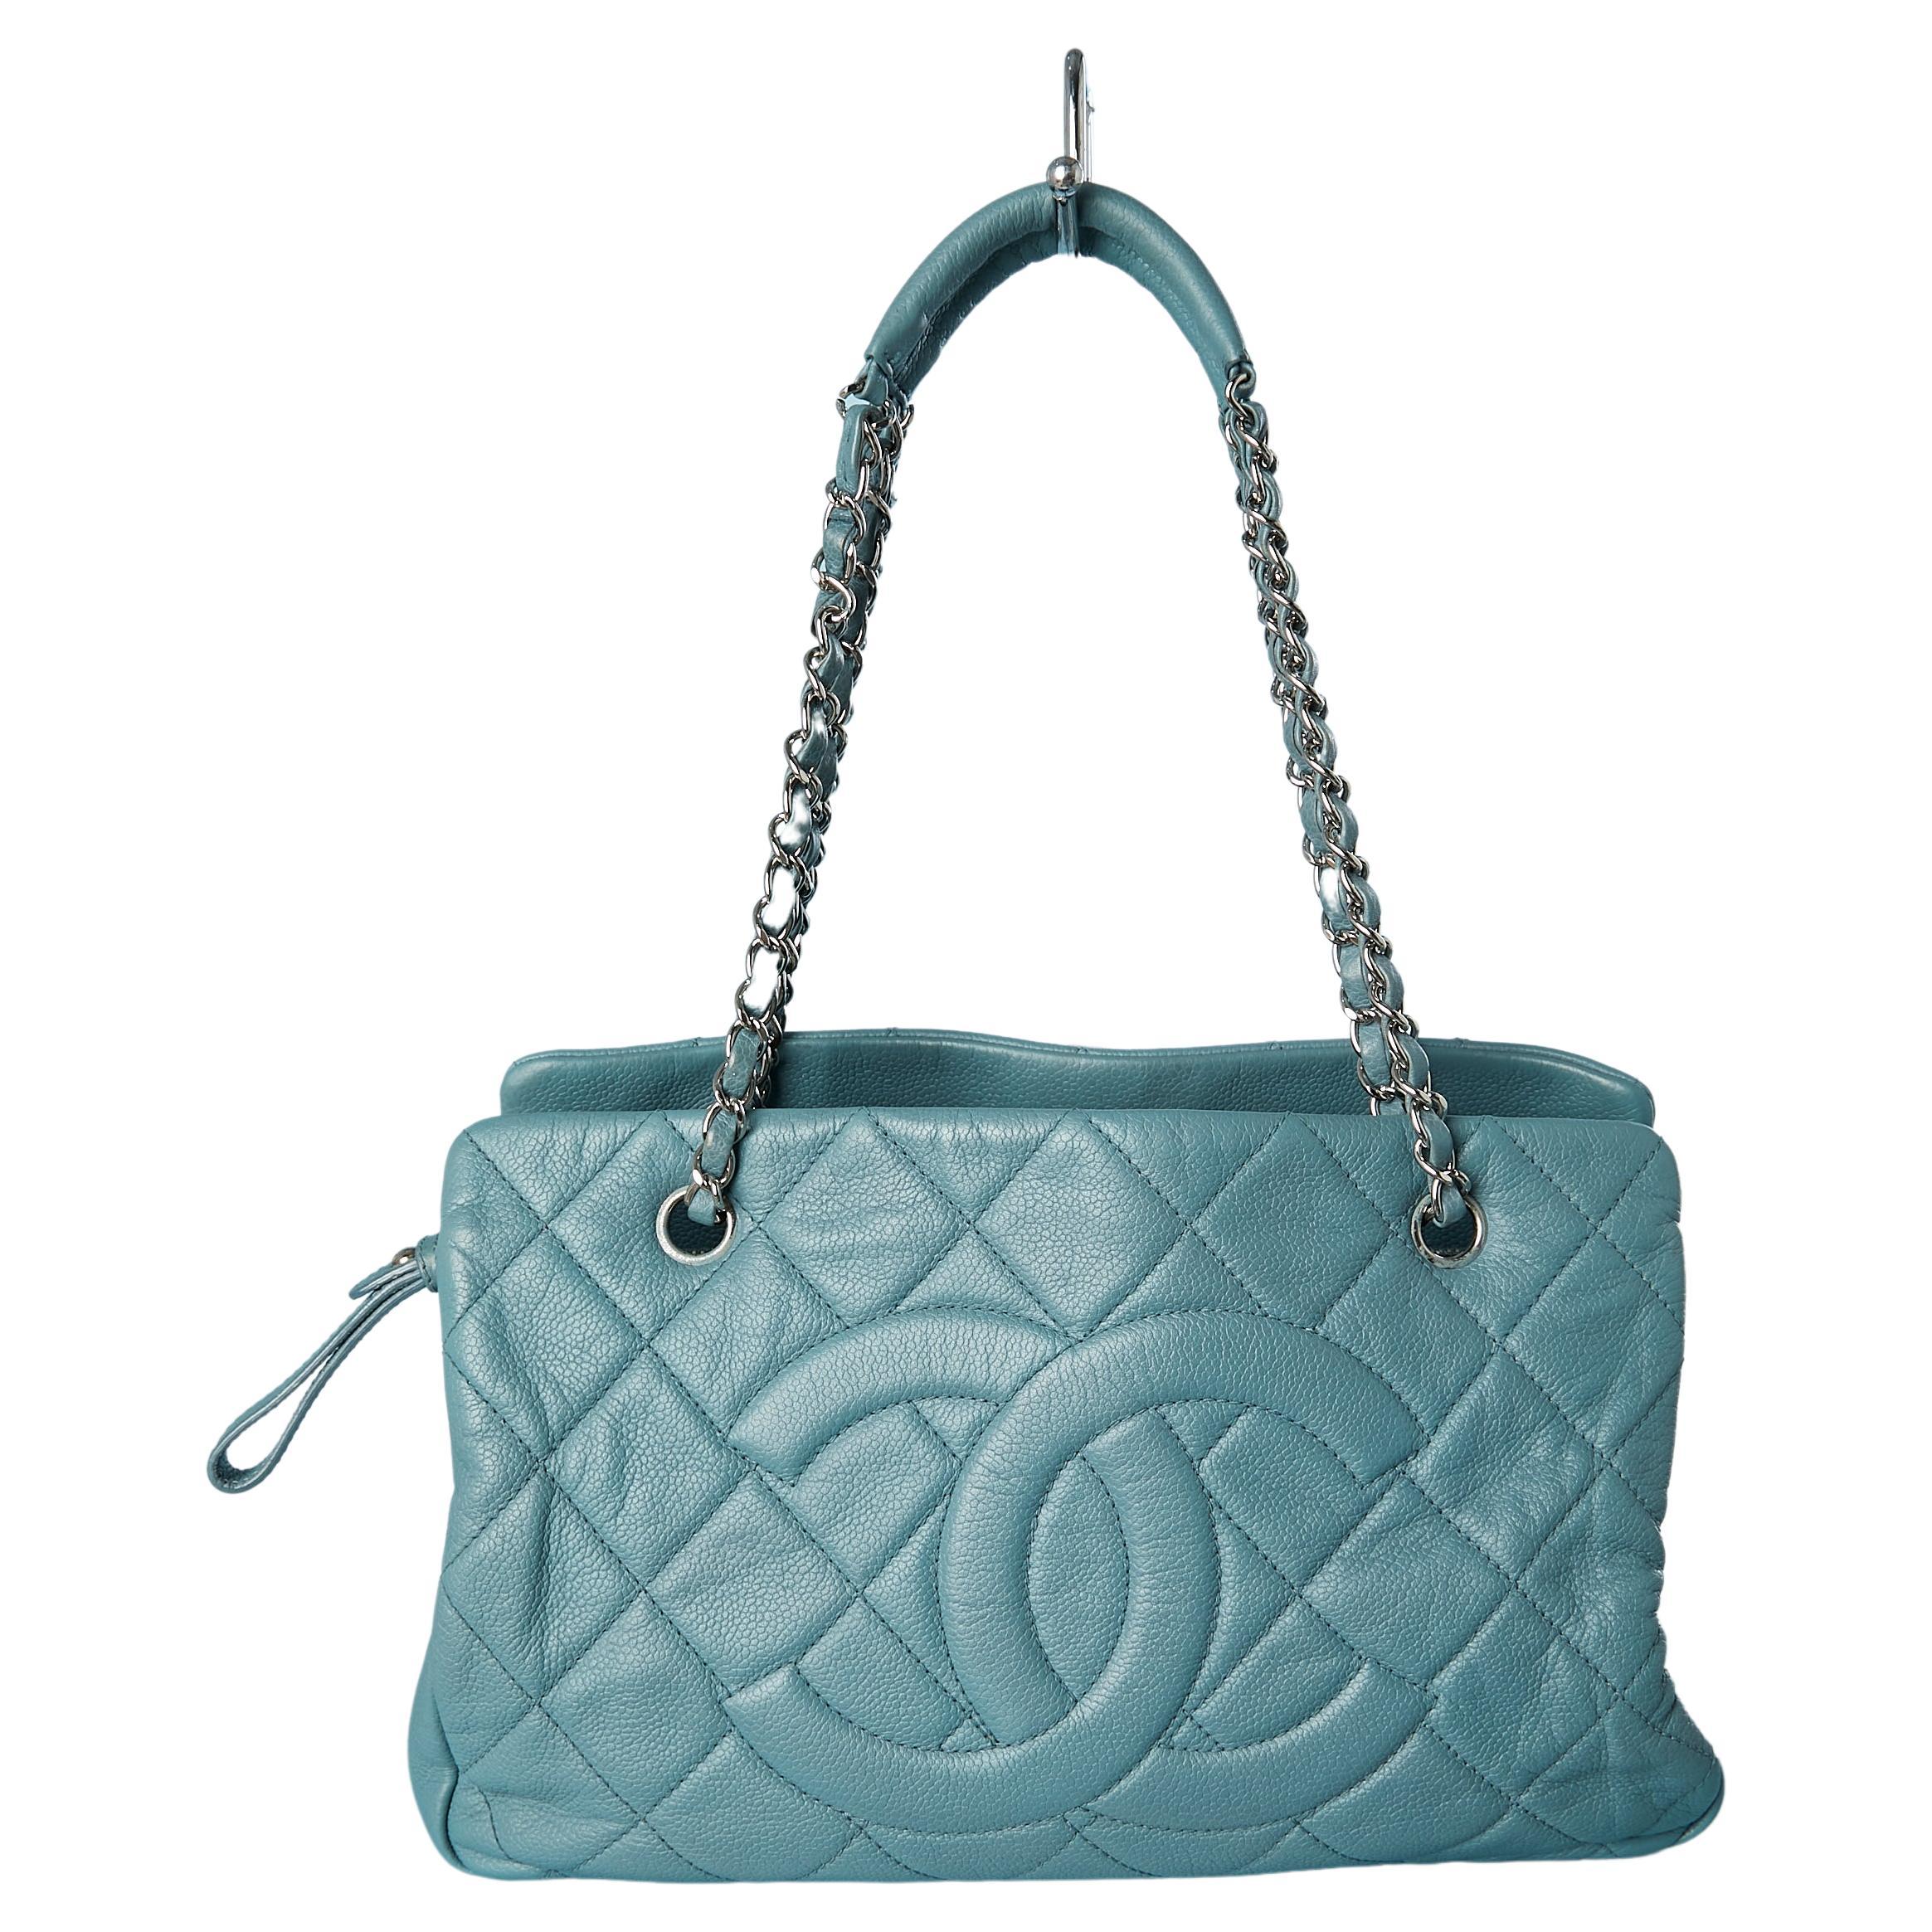 Blue topstitched leather bag with chains handles Chanel Numbered  For Sale